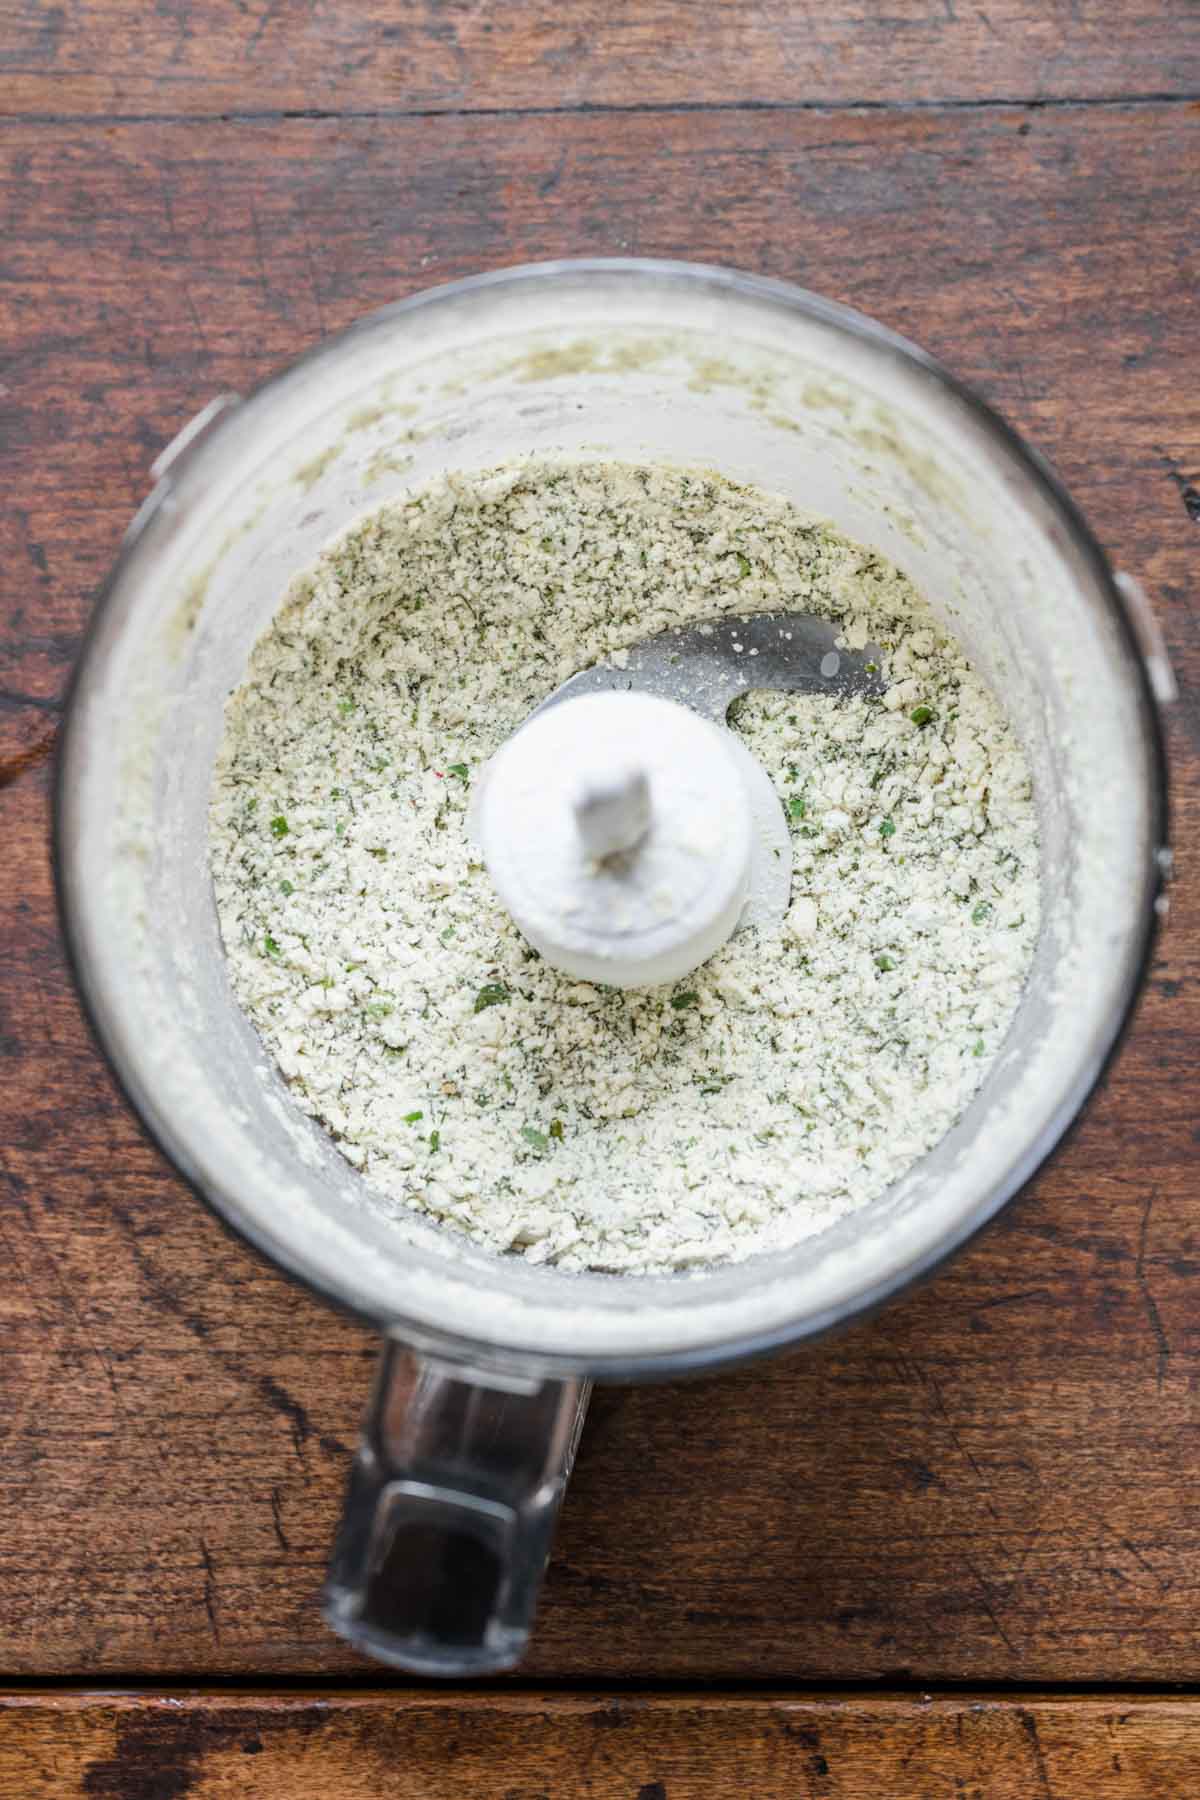 Dry Buttermilk Ranch Mix ingredients in food processor mixed without liquid